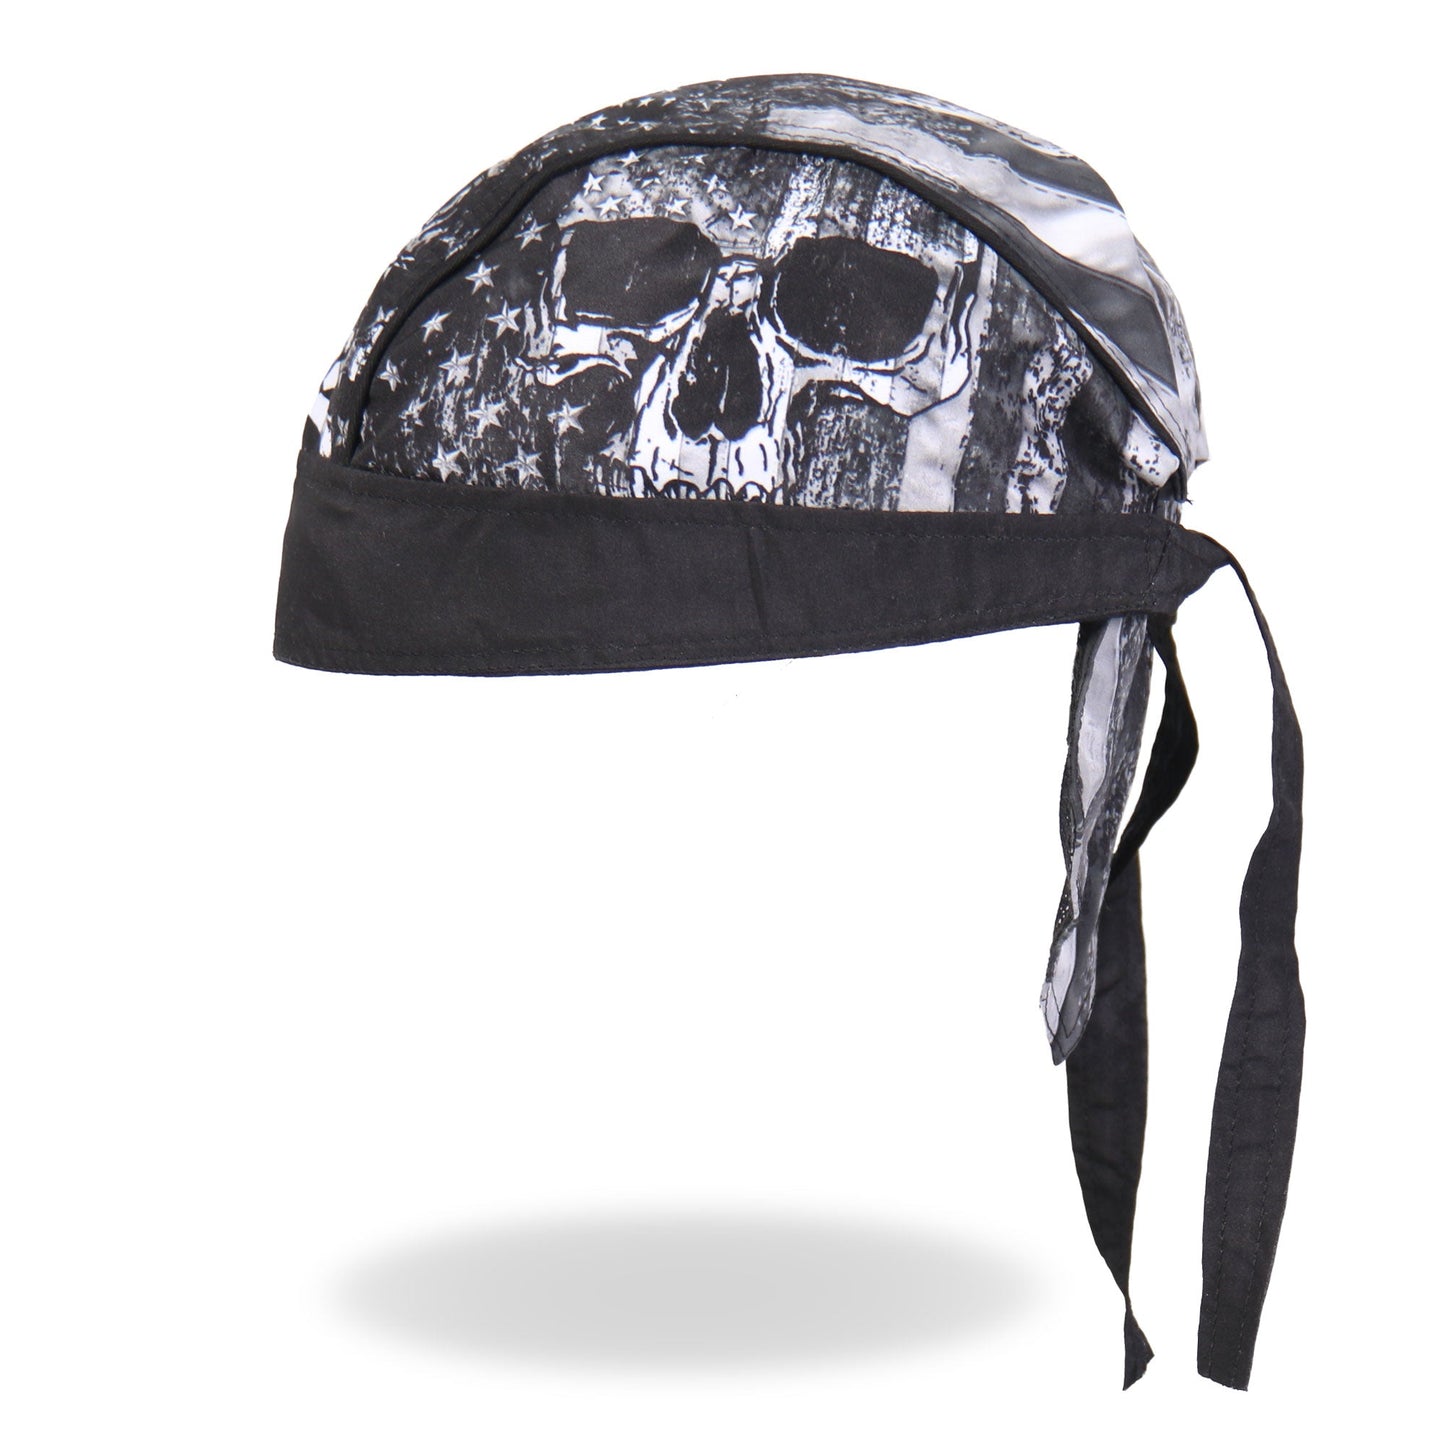 Hot Leathers Skull Flag Lightweight Headwrap HWH1090